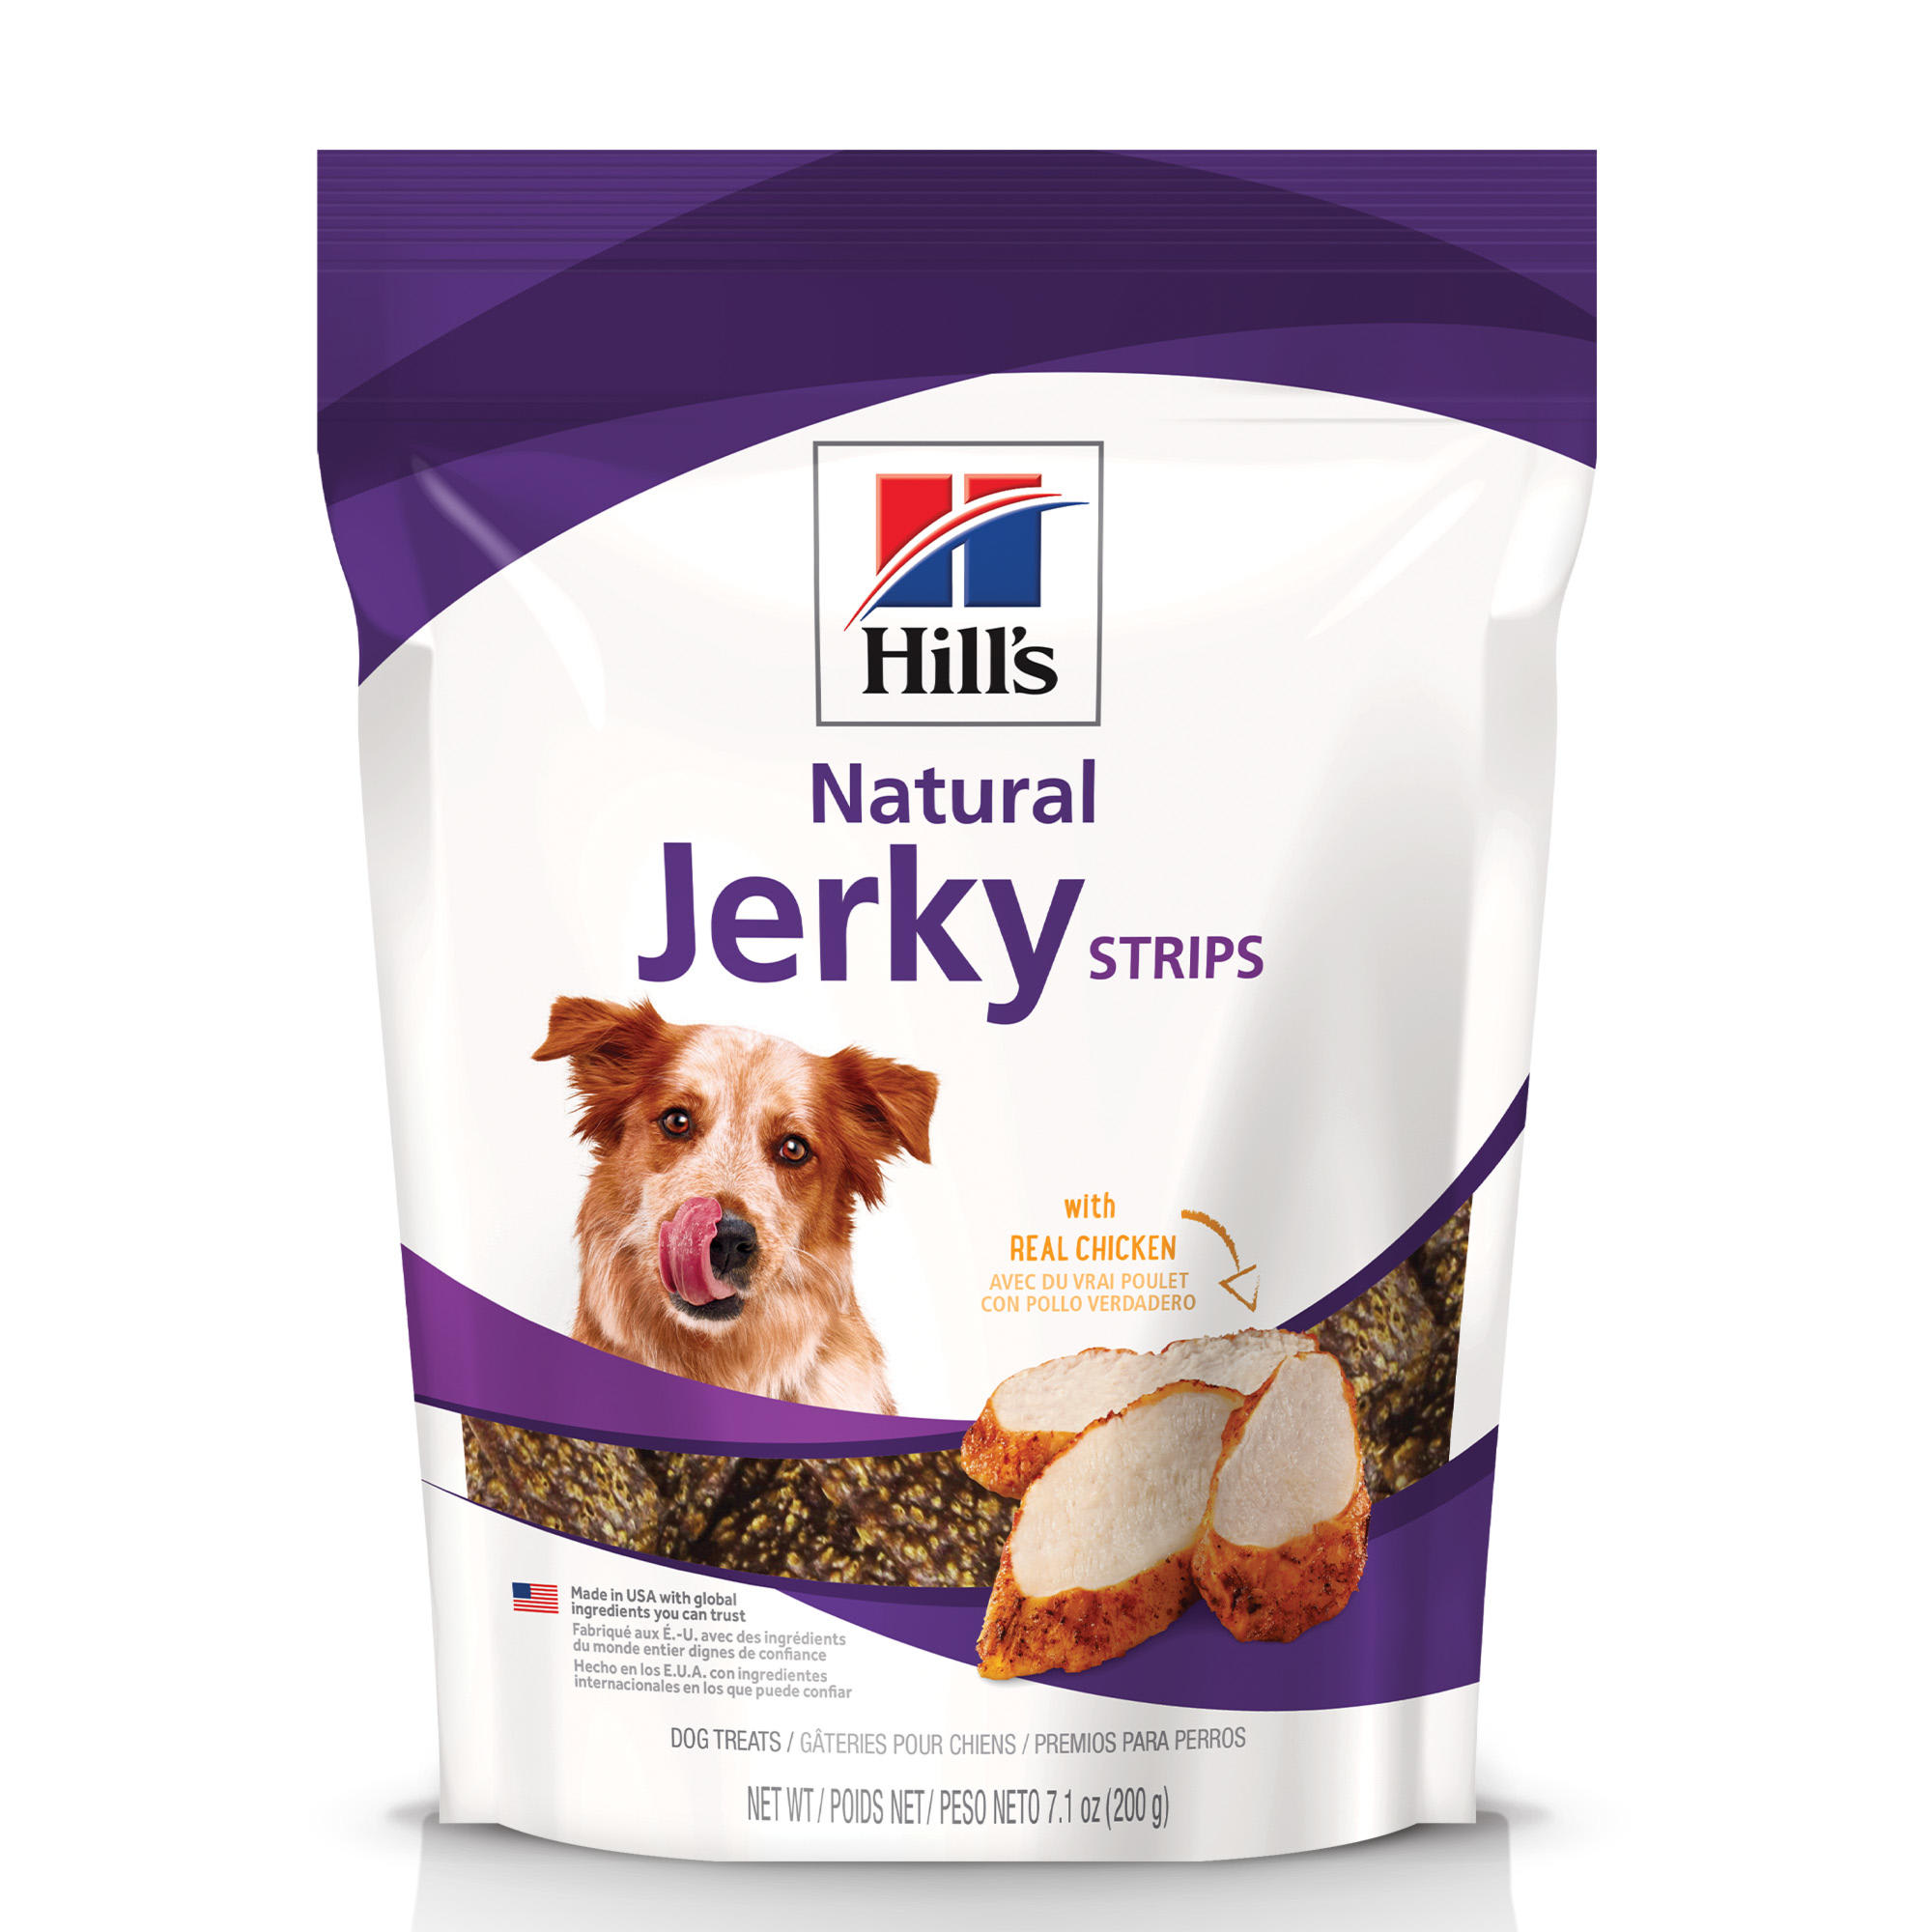 Photos - Dog Food Hills Hill's Hill's Natural Jerky Strips with Real Chicken Dog Treat, 7.1 oz., B 